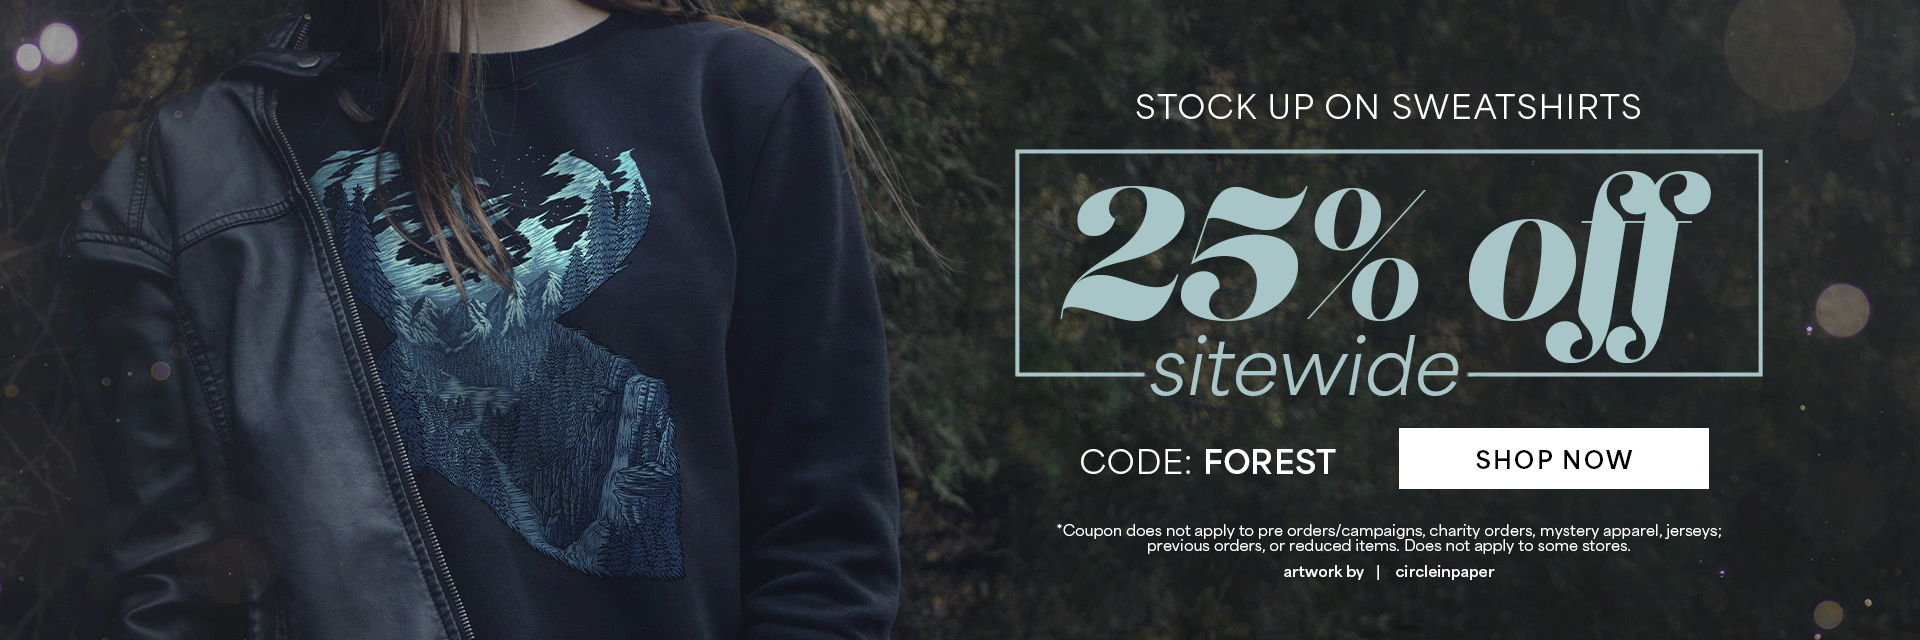 Hero Image: &quot;Last Day. Stock up on sweatshirts. 25% off sitewide. code forest. shop now. Some exclusions apply. M&quot;